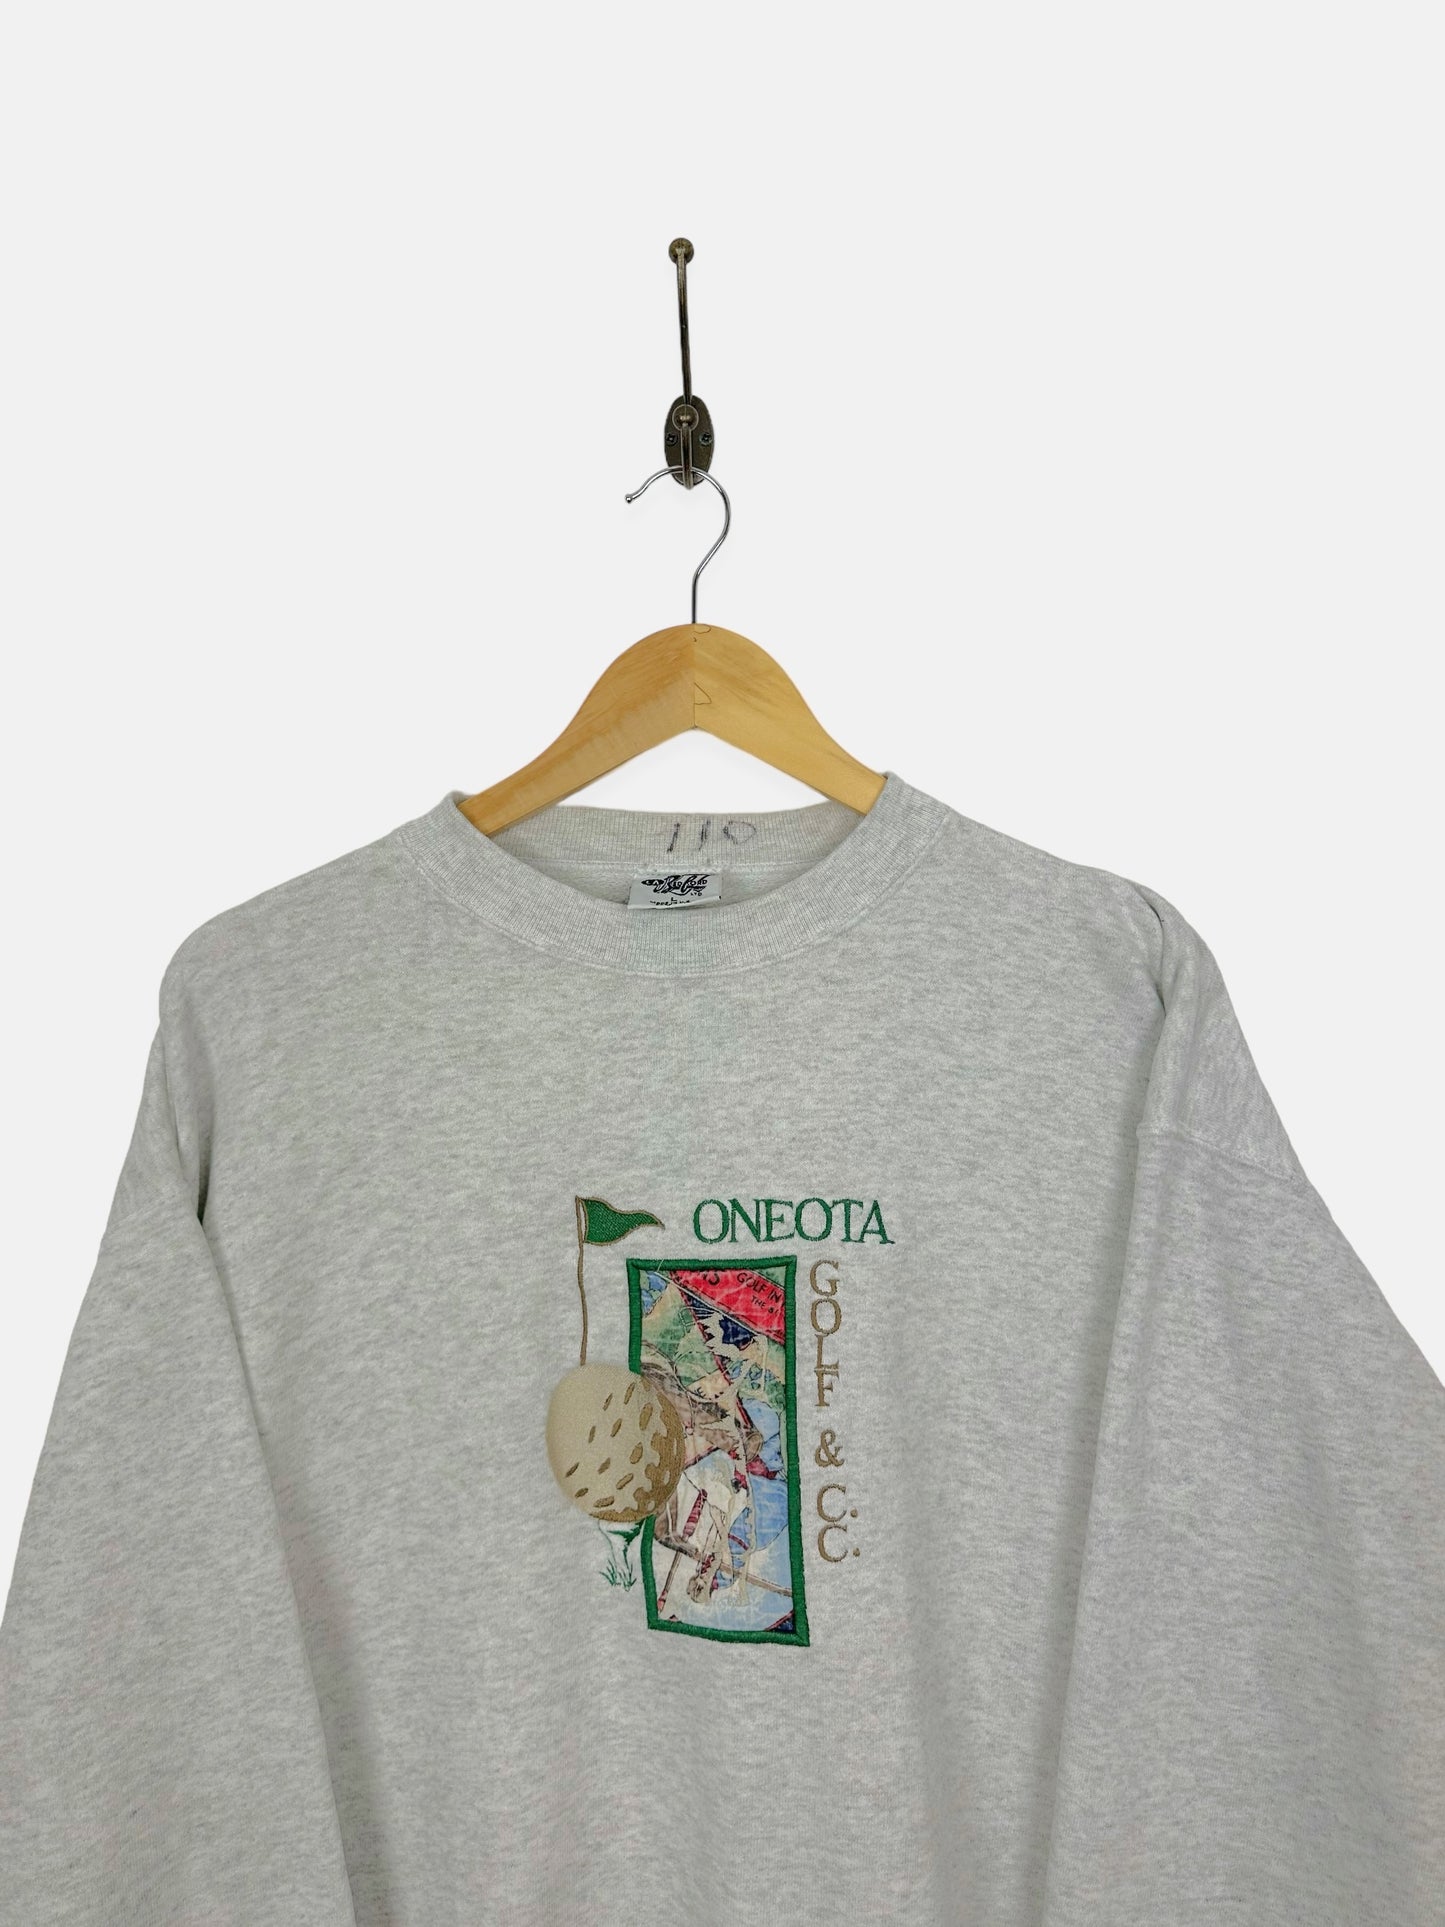 90's Oneota Golf Club USA Made Embroidered Vintage Sweatshirt Size L